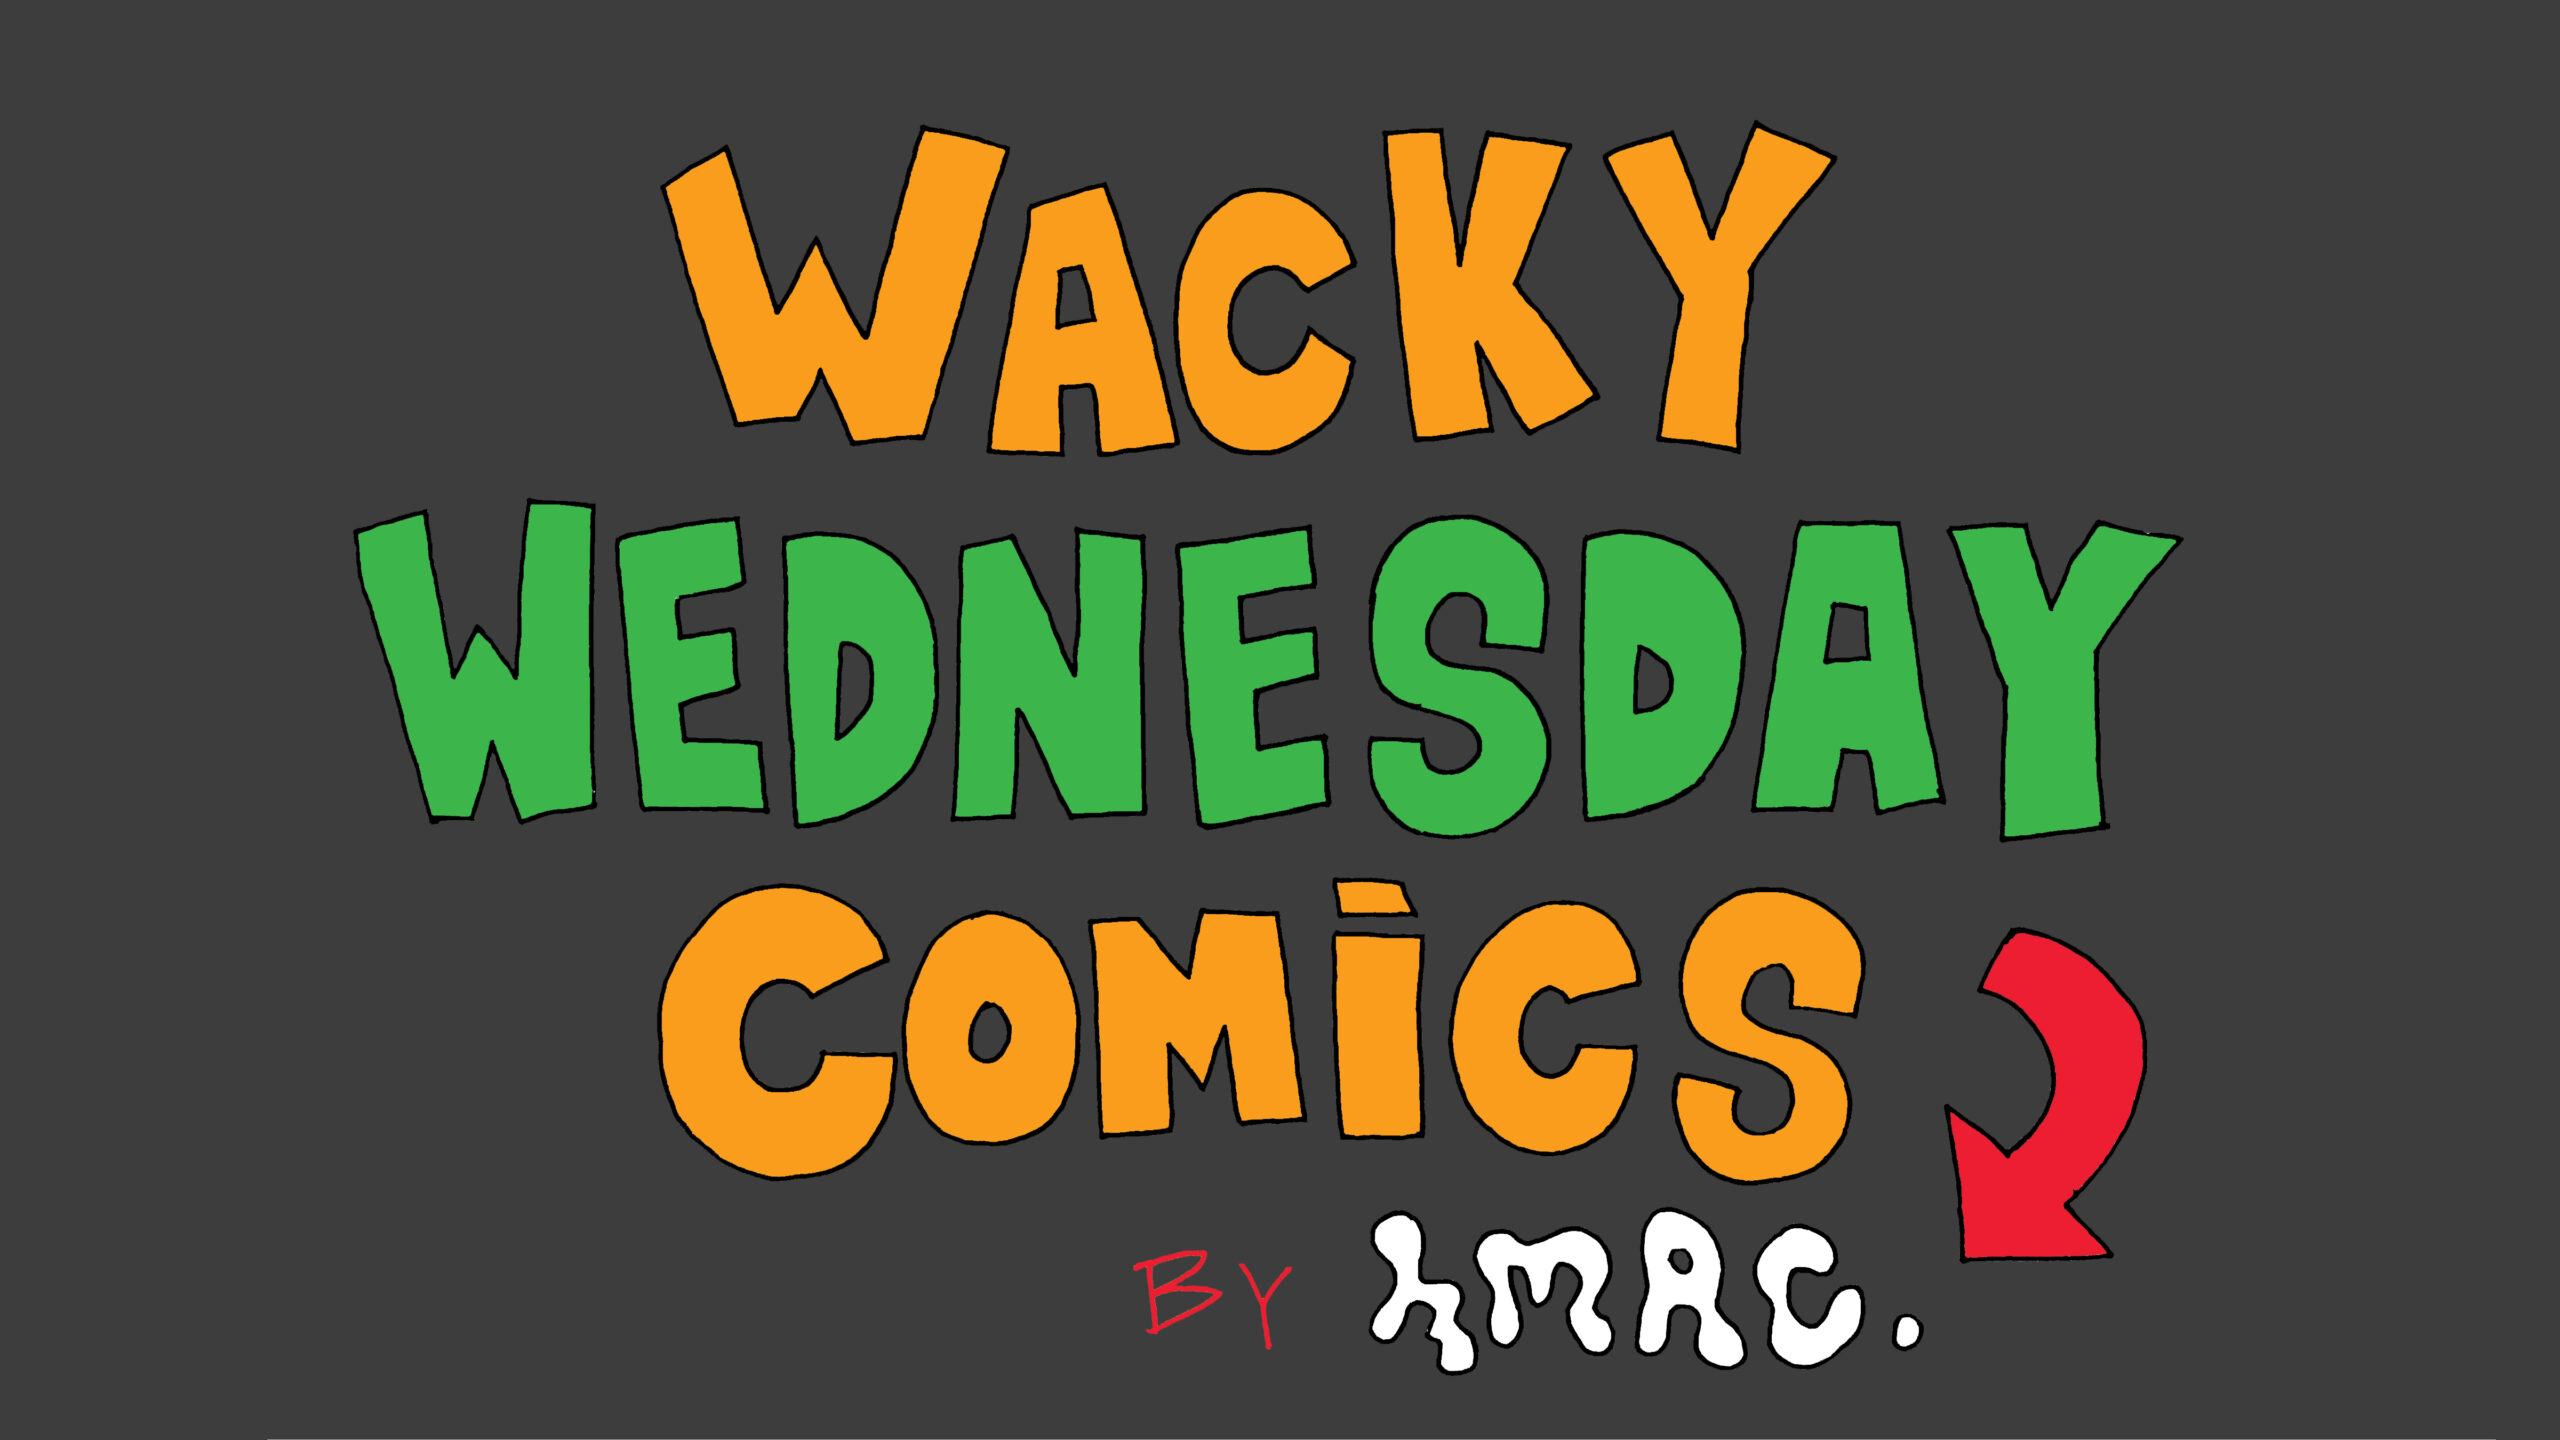 Illustration of the words "Wacky Wednesday Comics by HMAC" in orange, white, green and red lettering, against a black background.